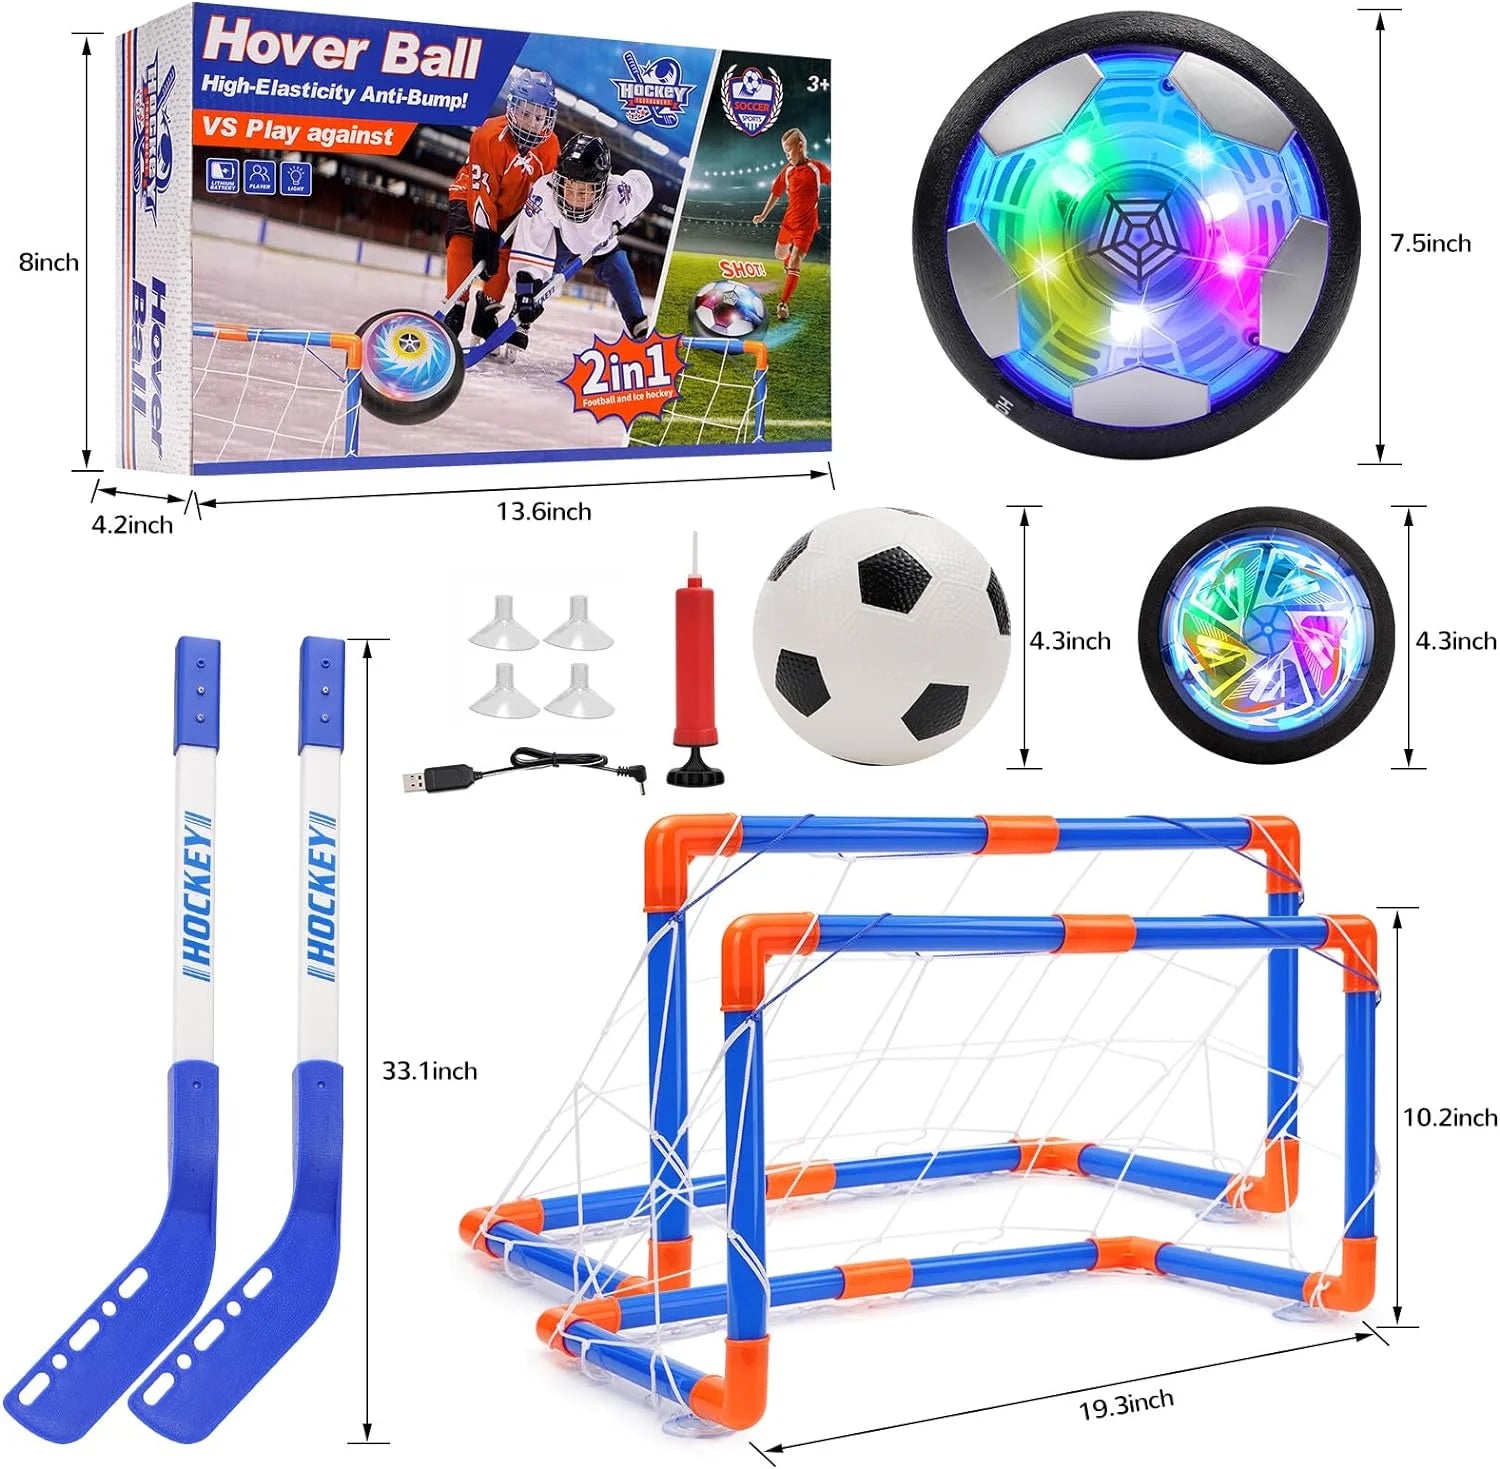 Hover Soccer Ball, 3-In-1 Hover Hockey Ball Kids Toys Set, Indoor and Outdoor Sports Games Toys for Kids Ages 3 4 5 6 7 8-12 - Rechargeable LED Soccer Games Toys for 3-12 Year Old Boys